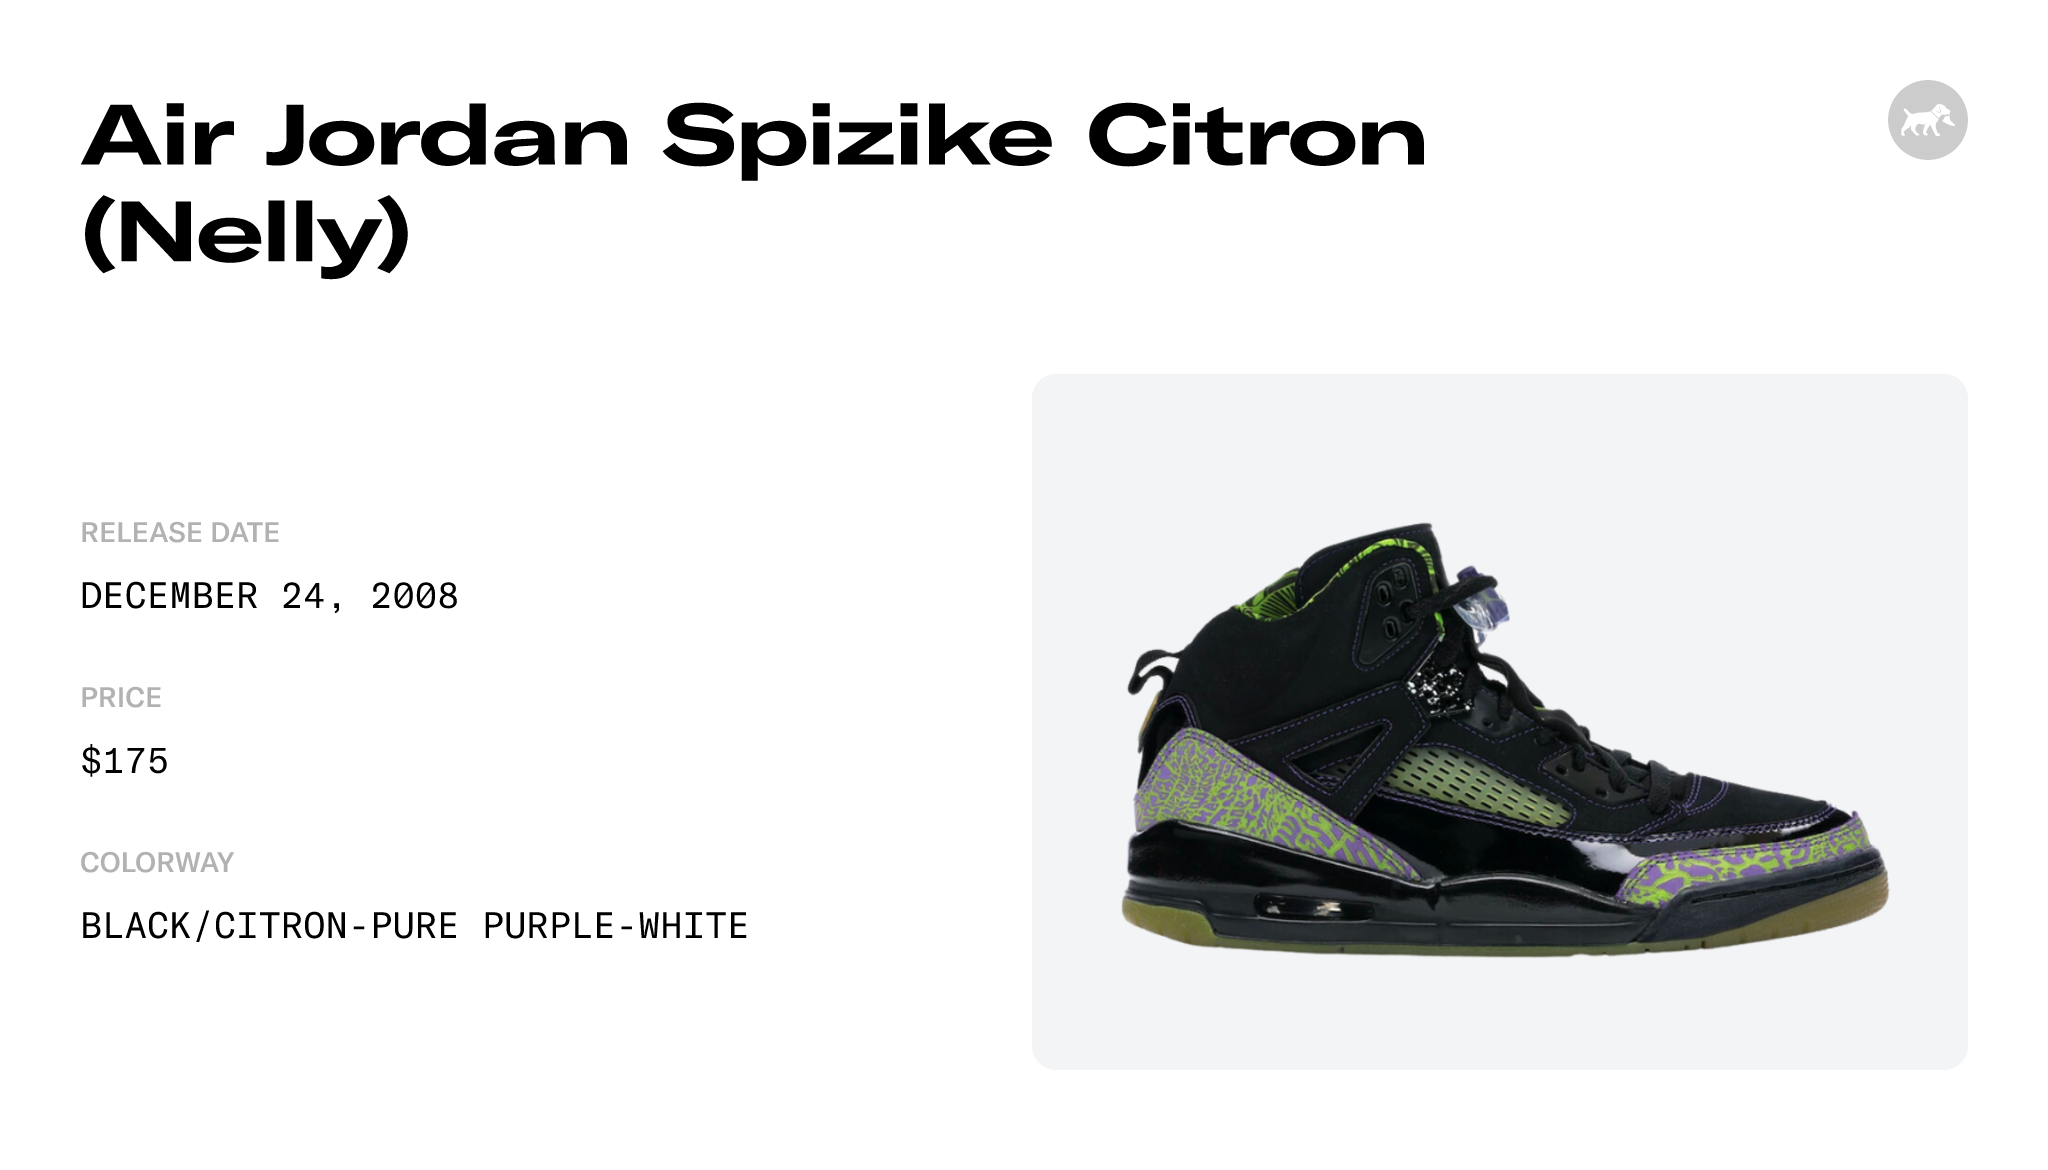 Air Jordan Spizike Citron (Nelly) - 315371-031 Raffles and Release Date